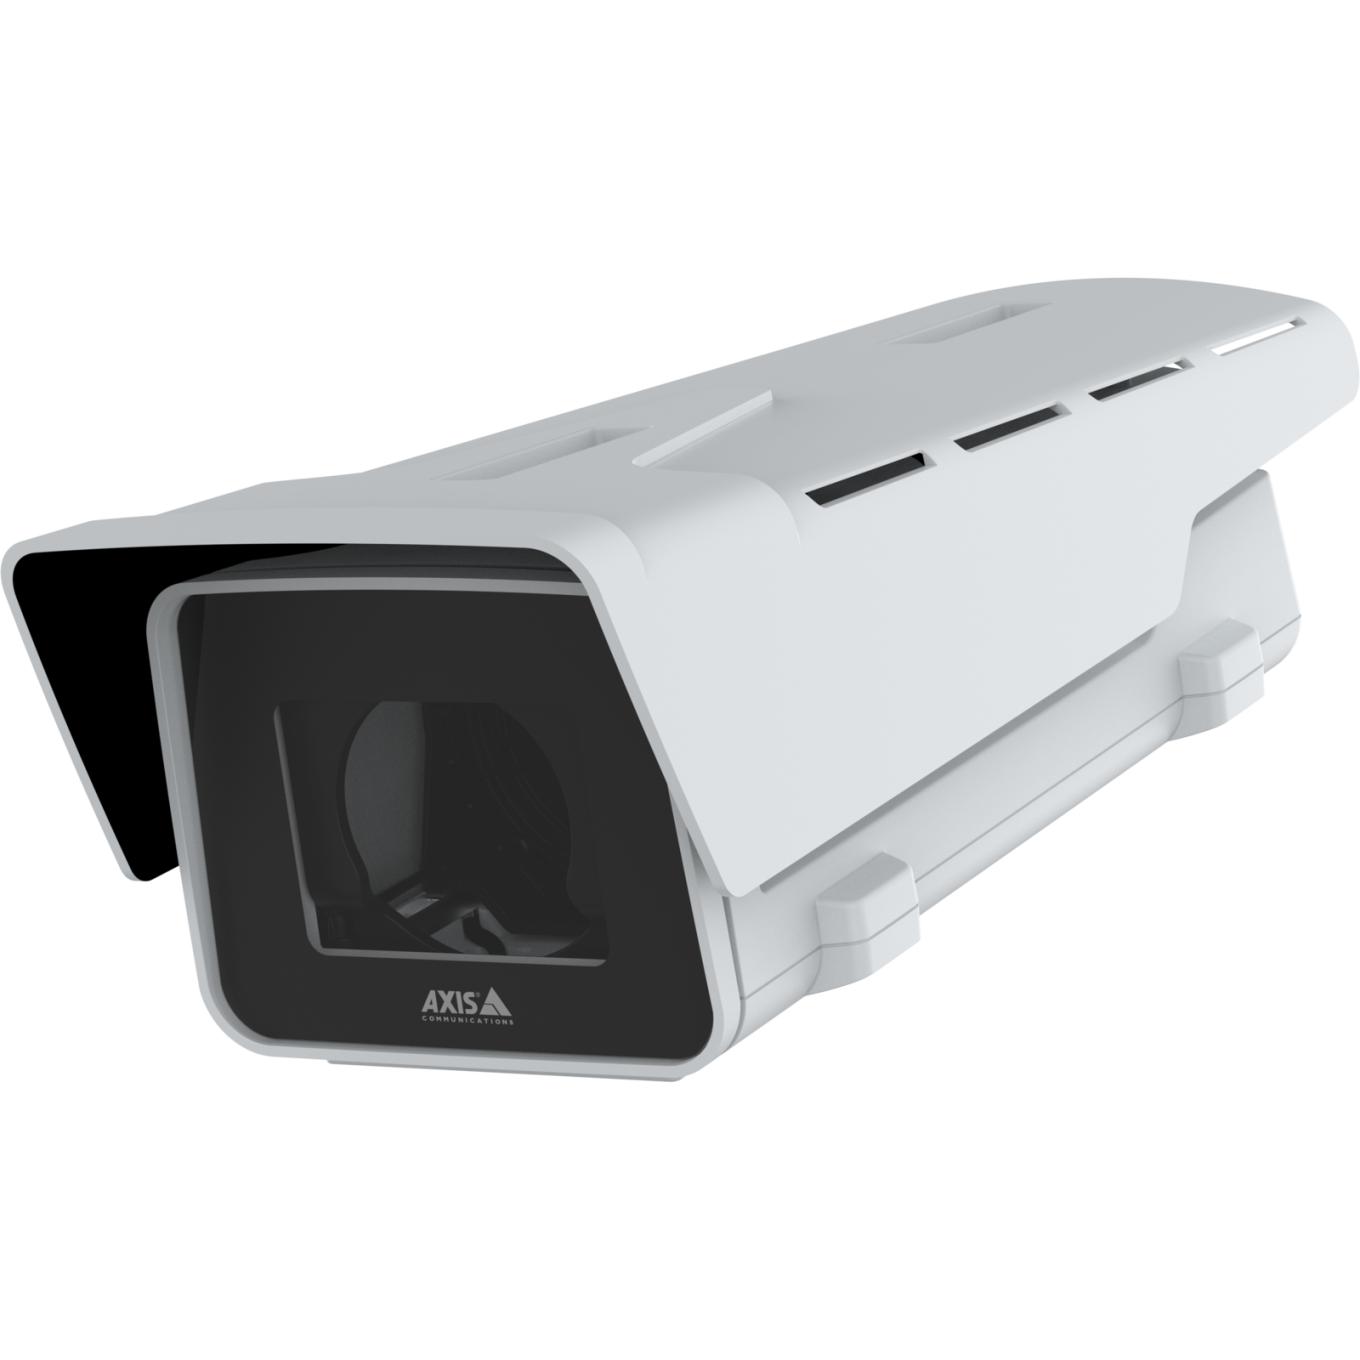 AXIS P1385-BE Box Camera | Axis Communications